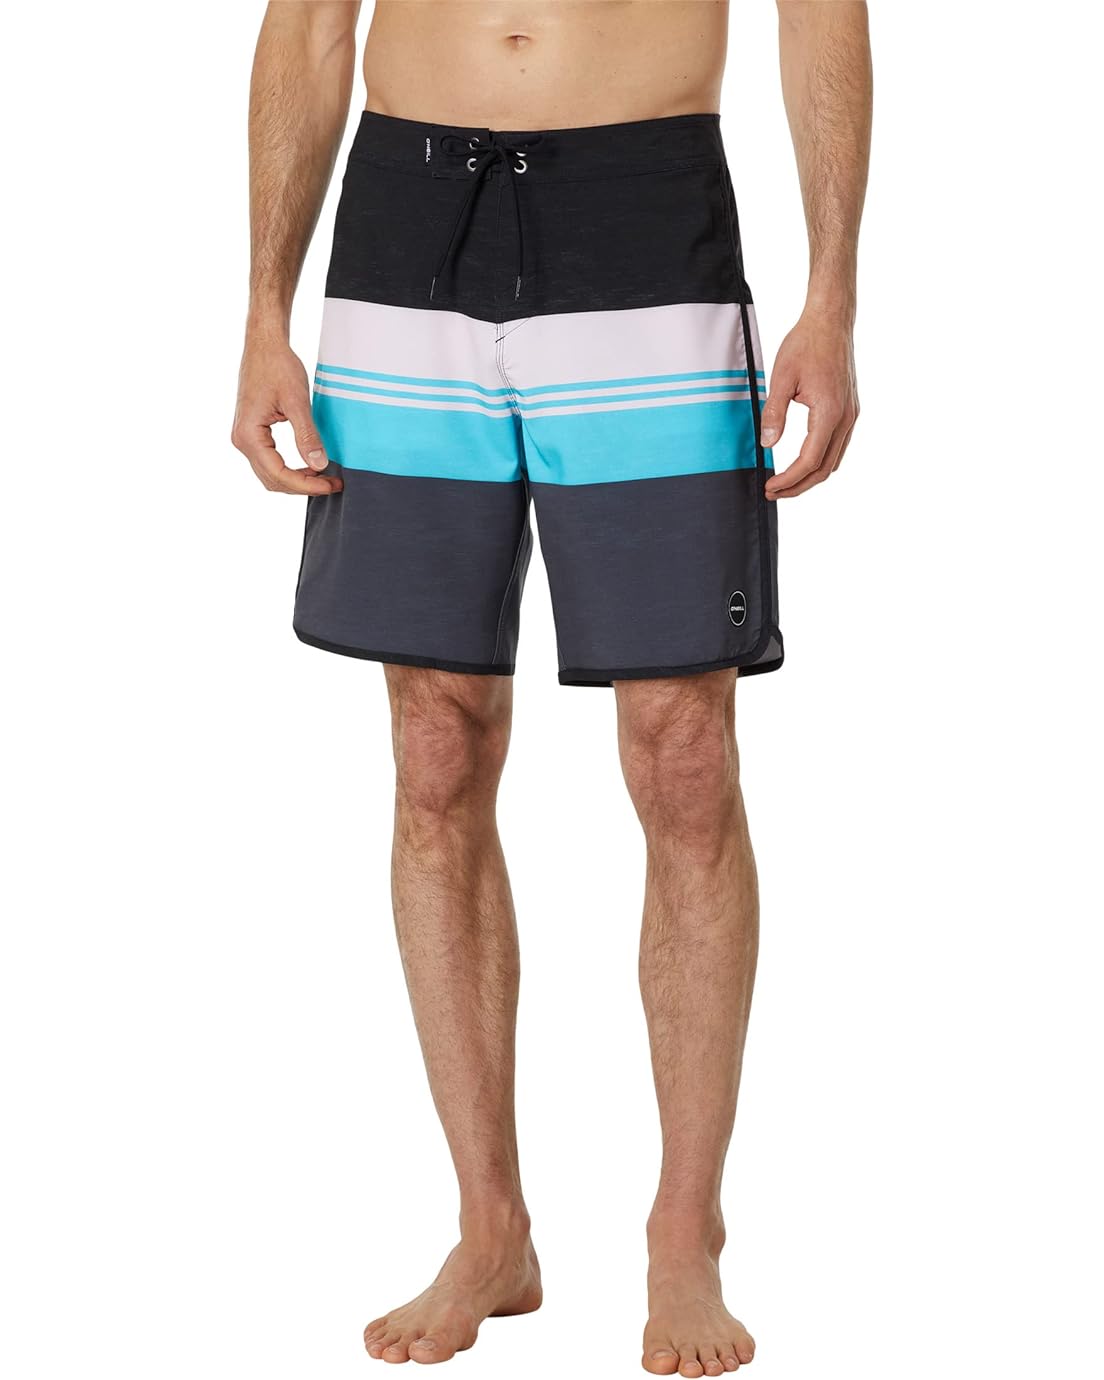 ONeill Four Square Stretch 19 Boardshorts